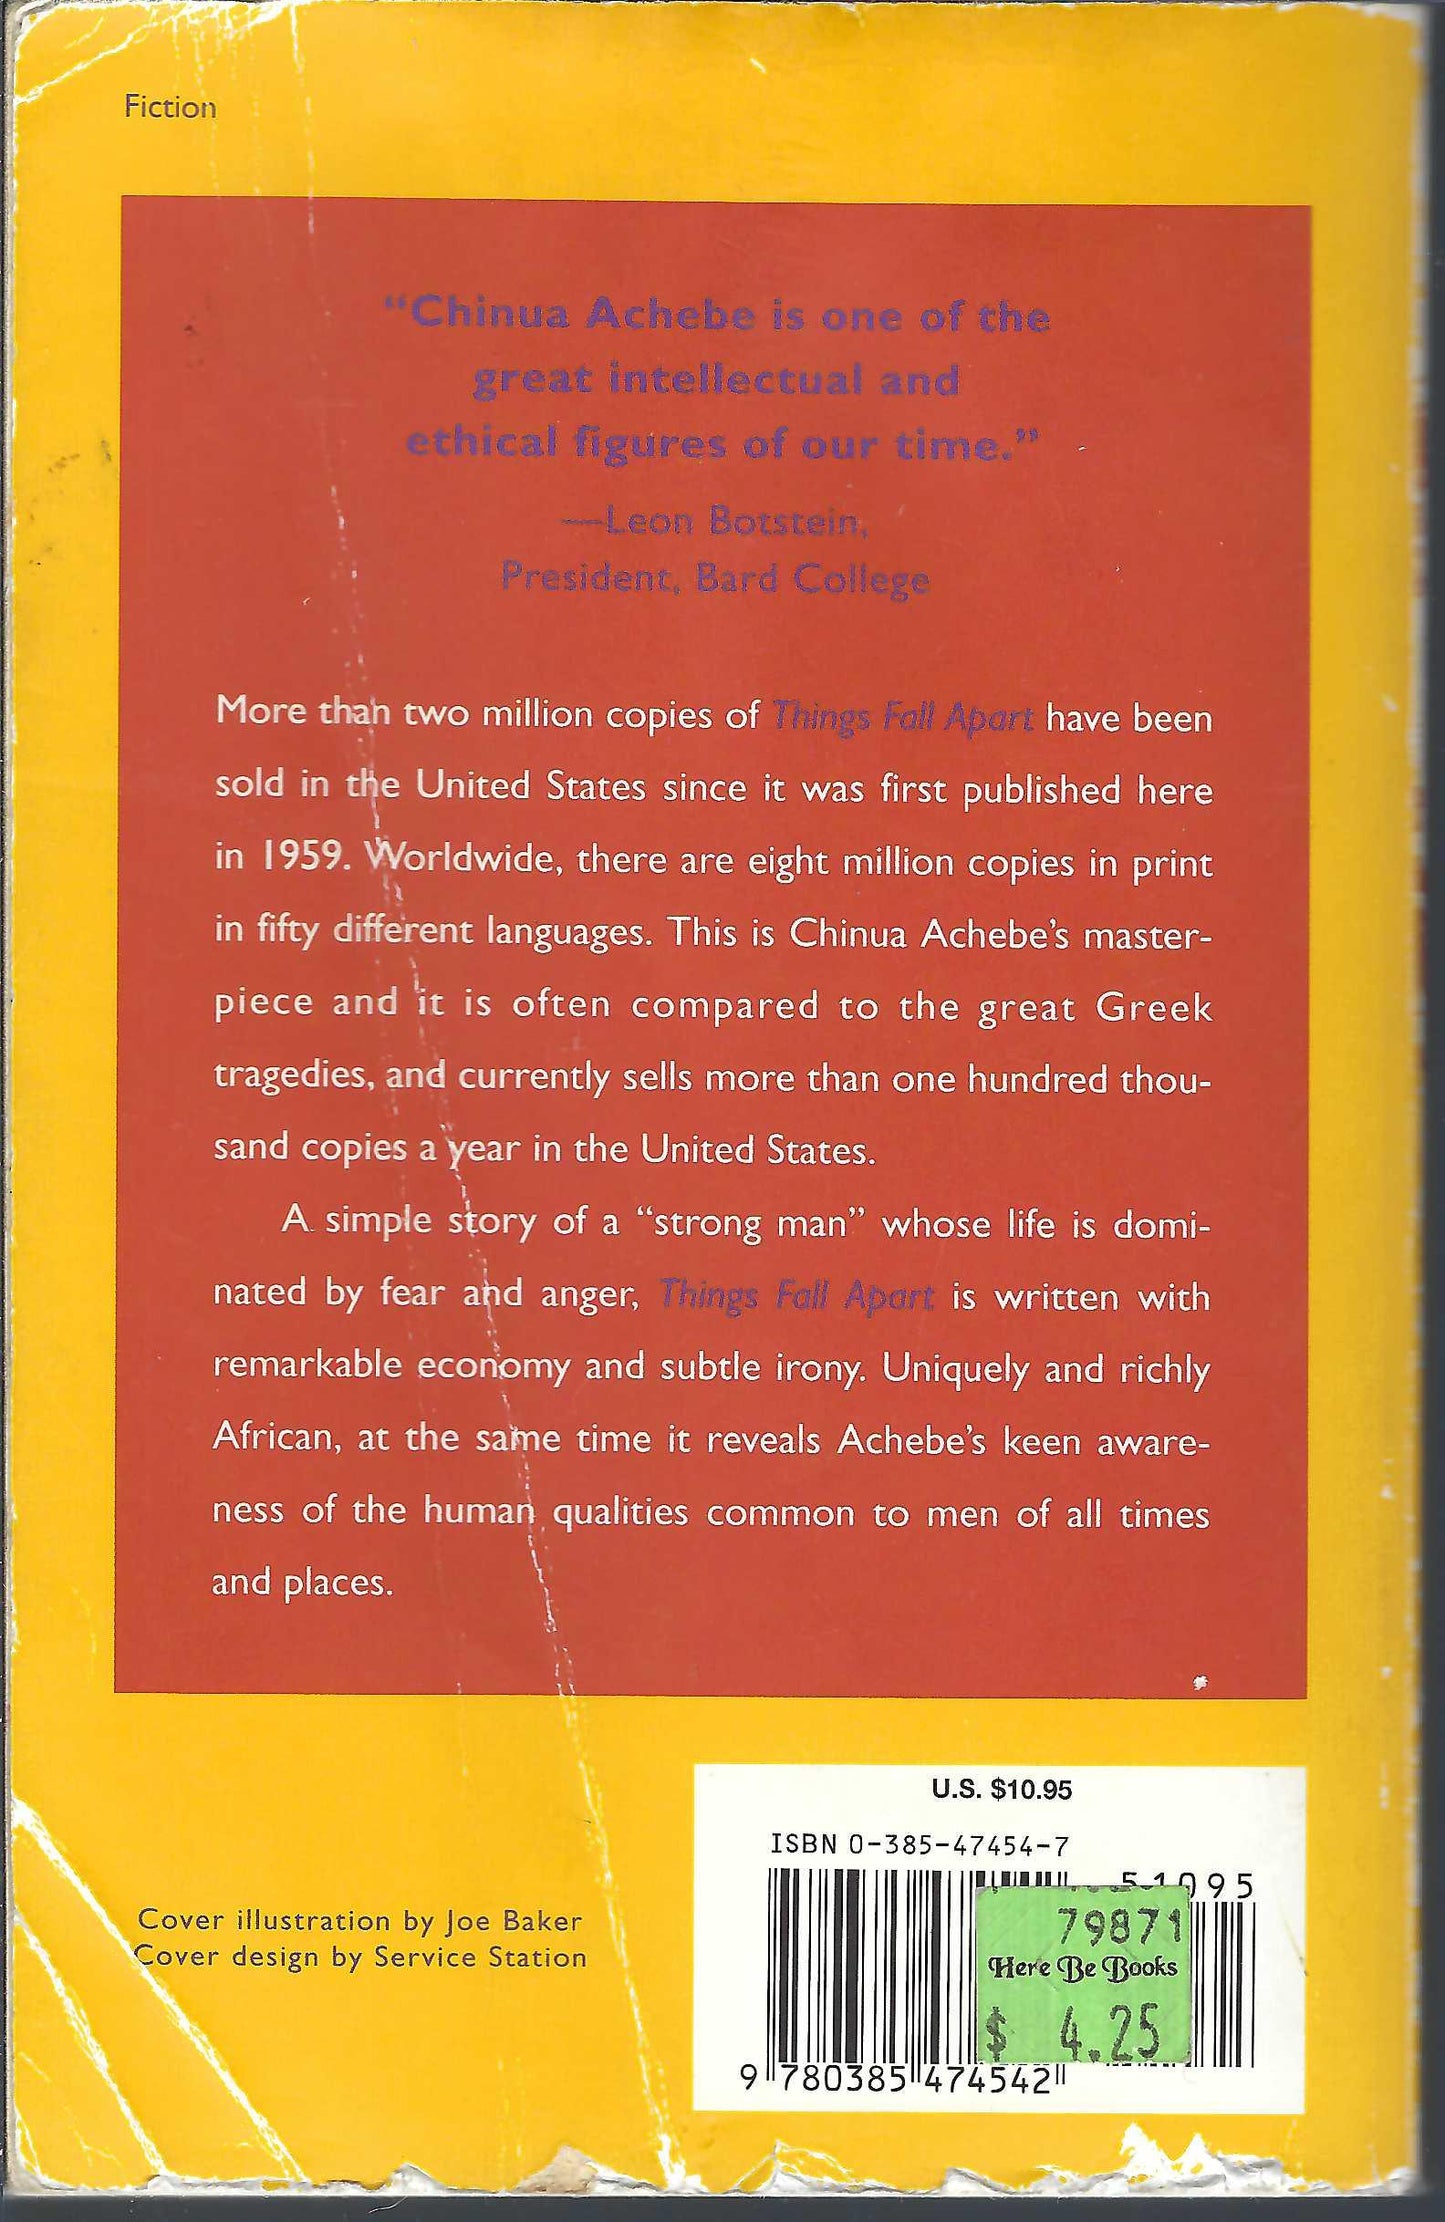 Things Fall Apart by Chinua Achebe back cover